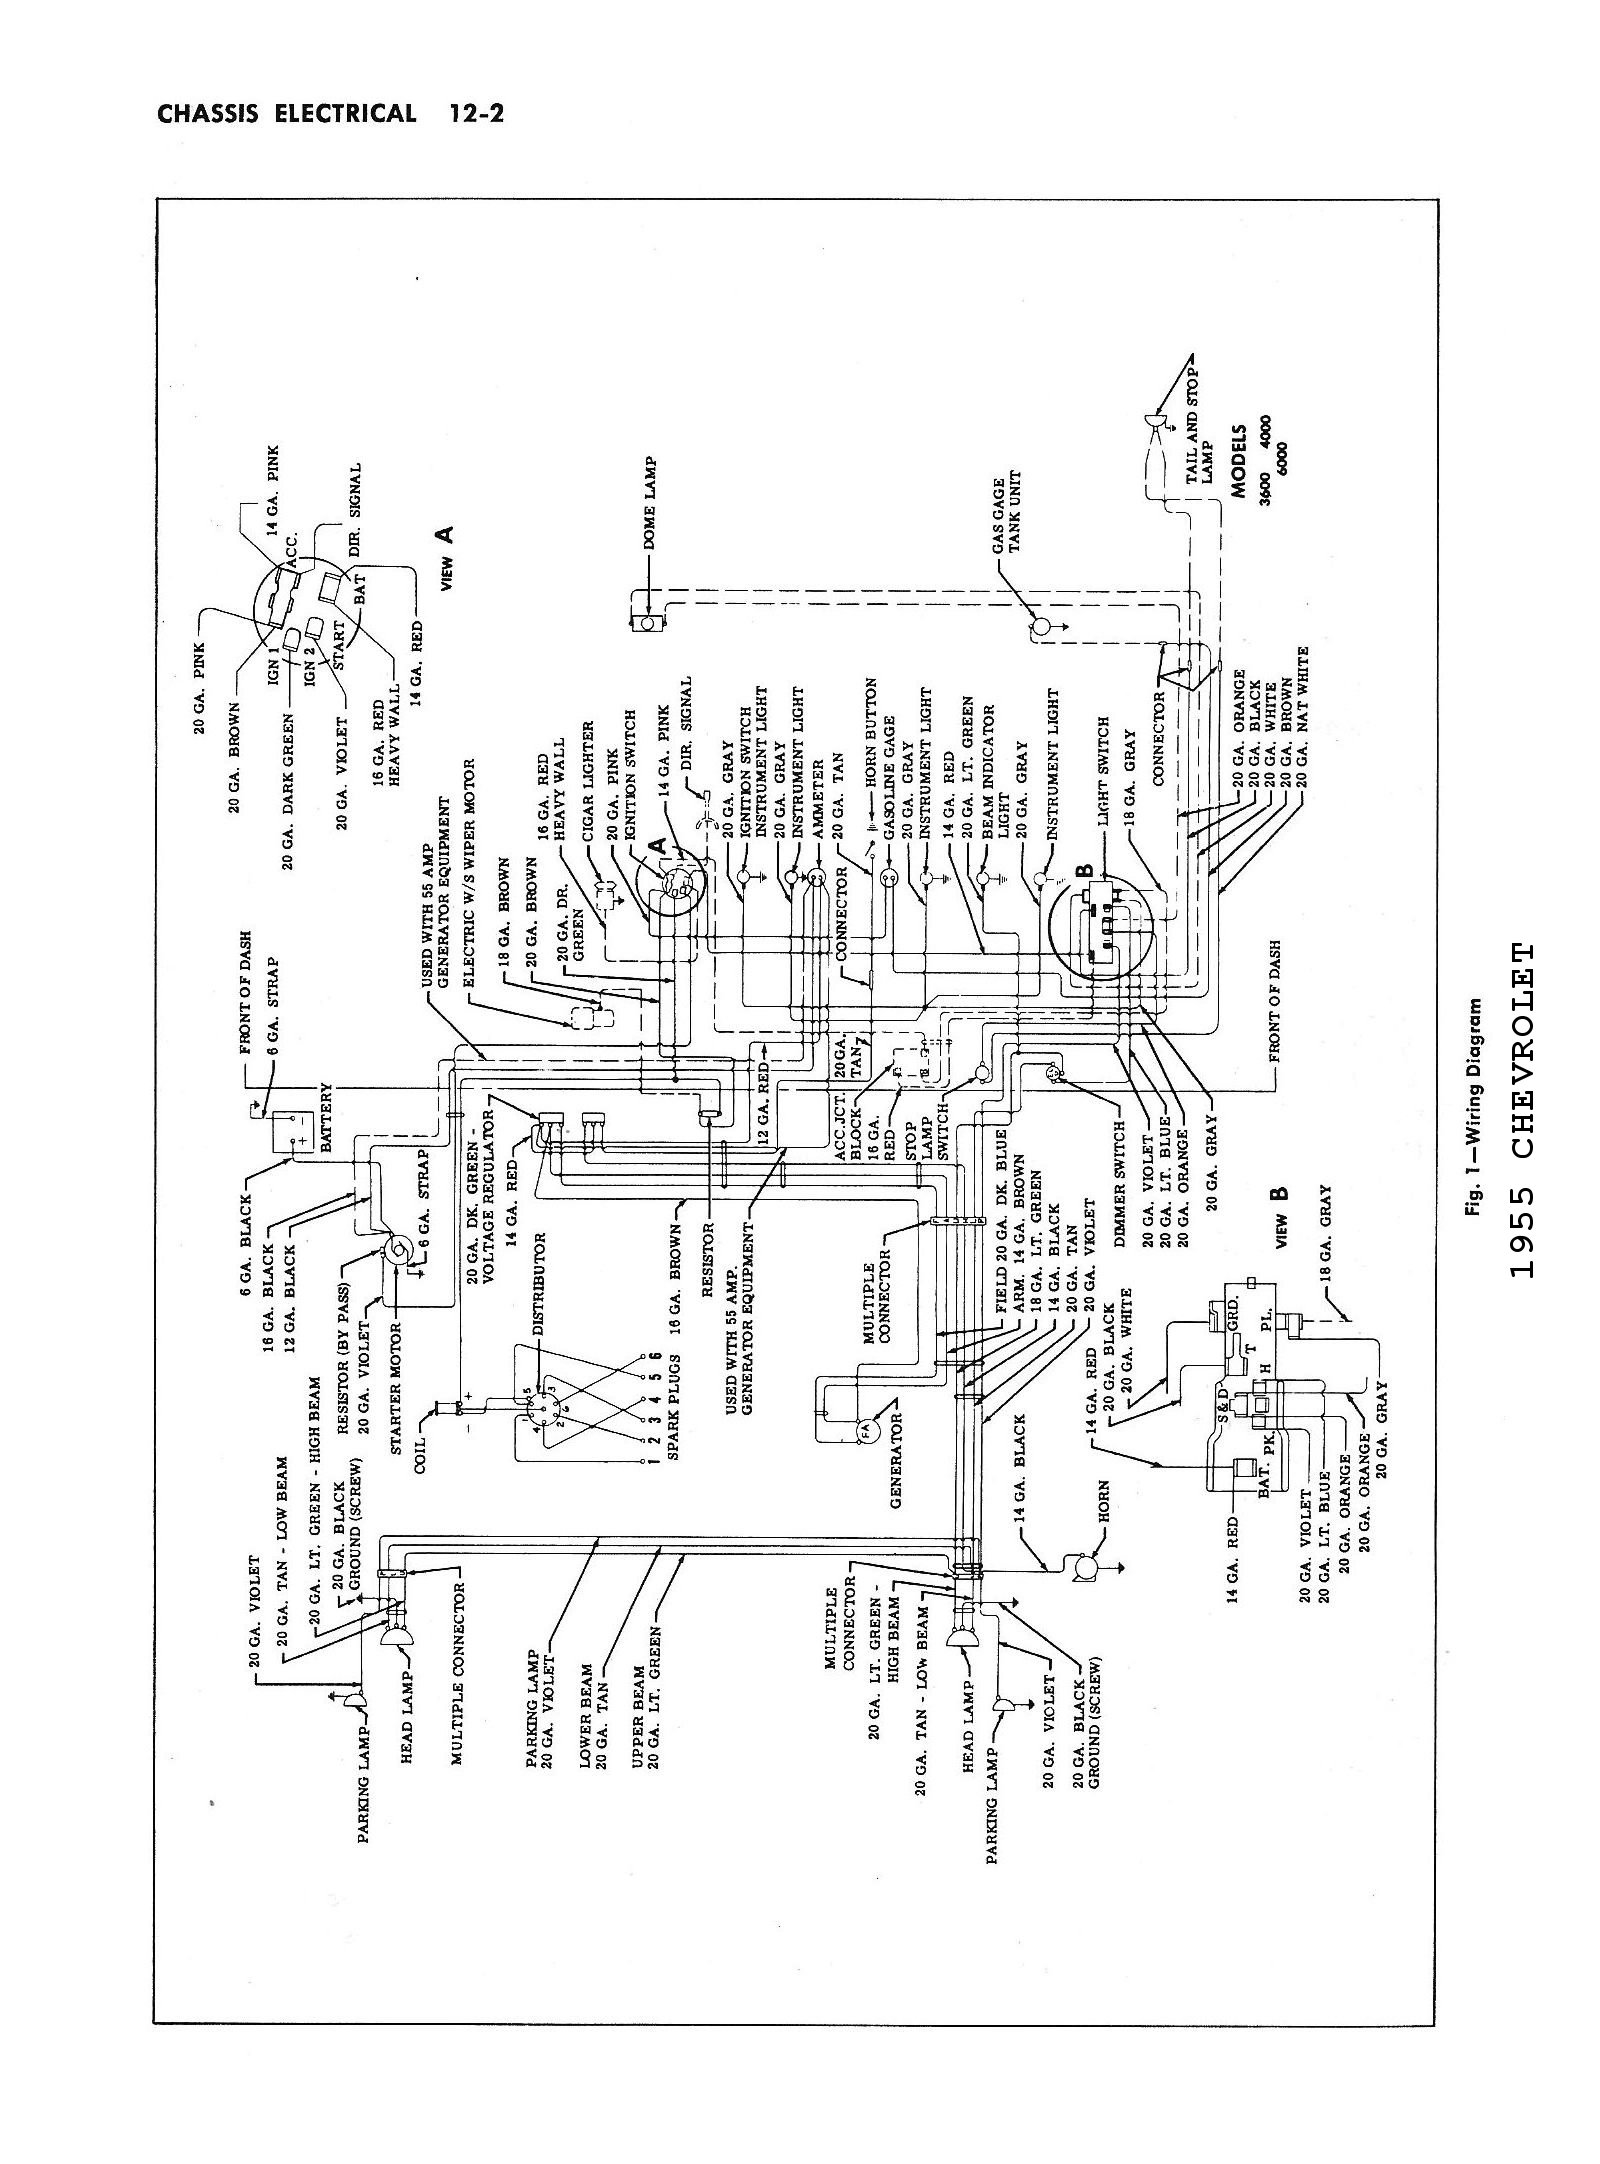 55 Chevy Ignition Switch Wiring Diagram from chevy.oldcarmanualproject.com